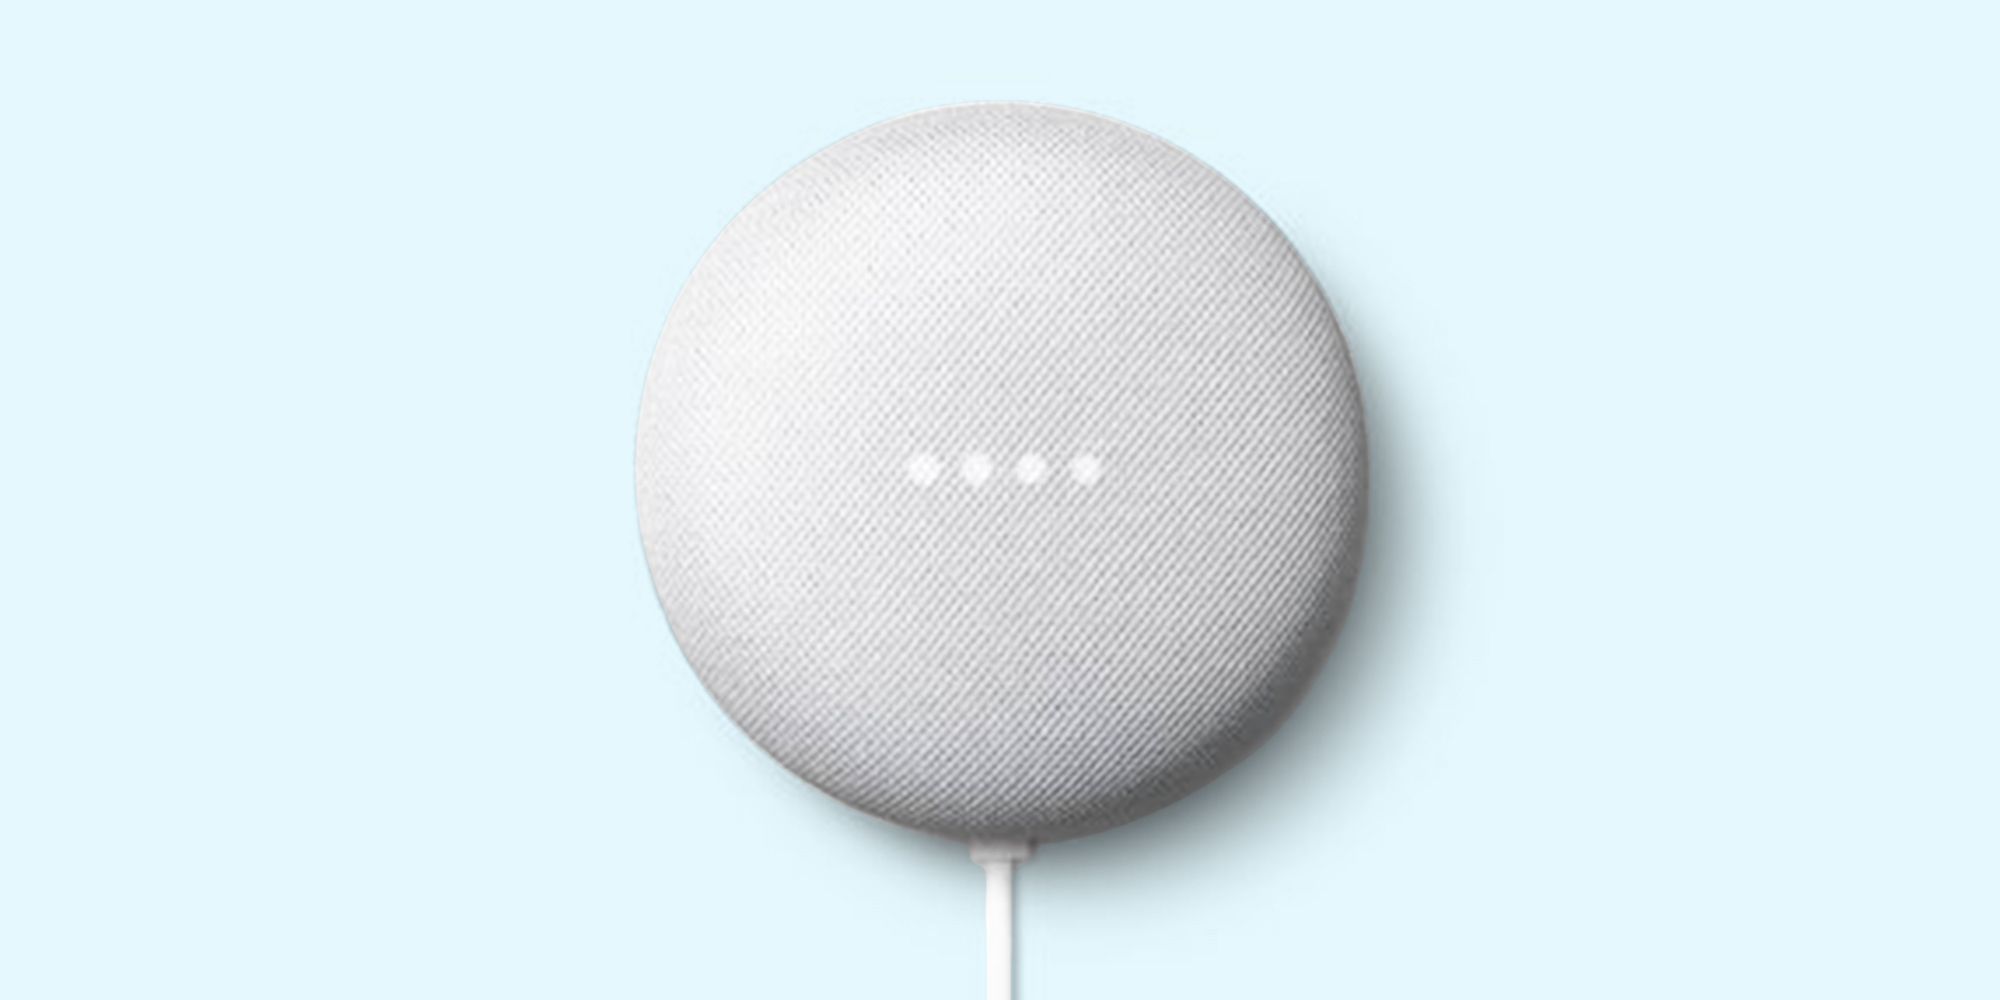 10 Best Google Home Accessories 2022 - Google Assistant Devices